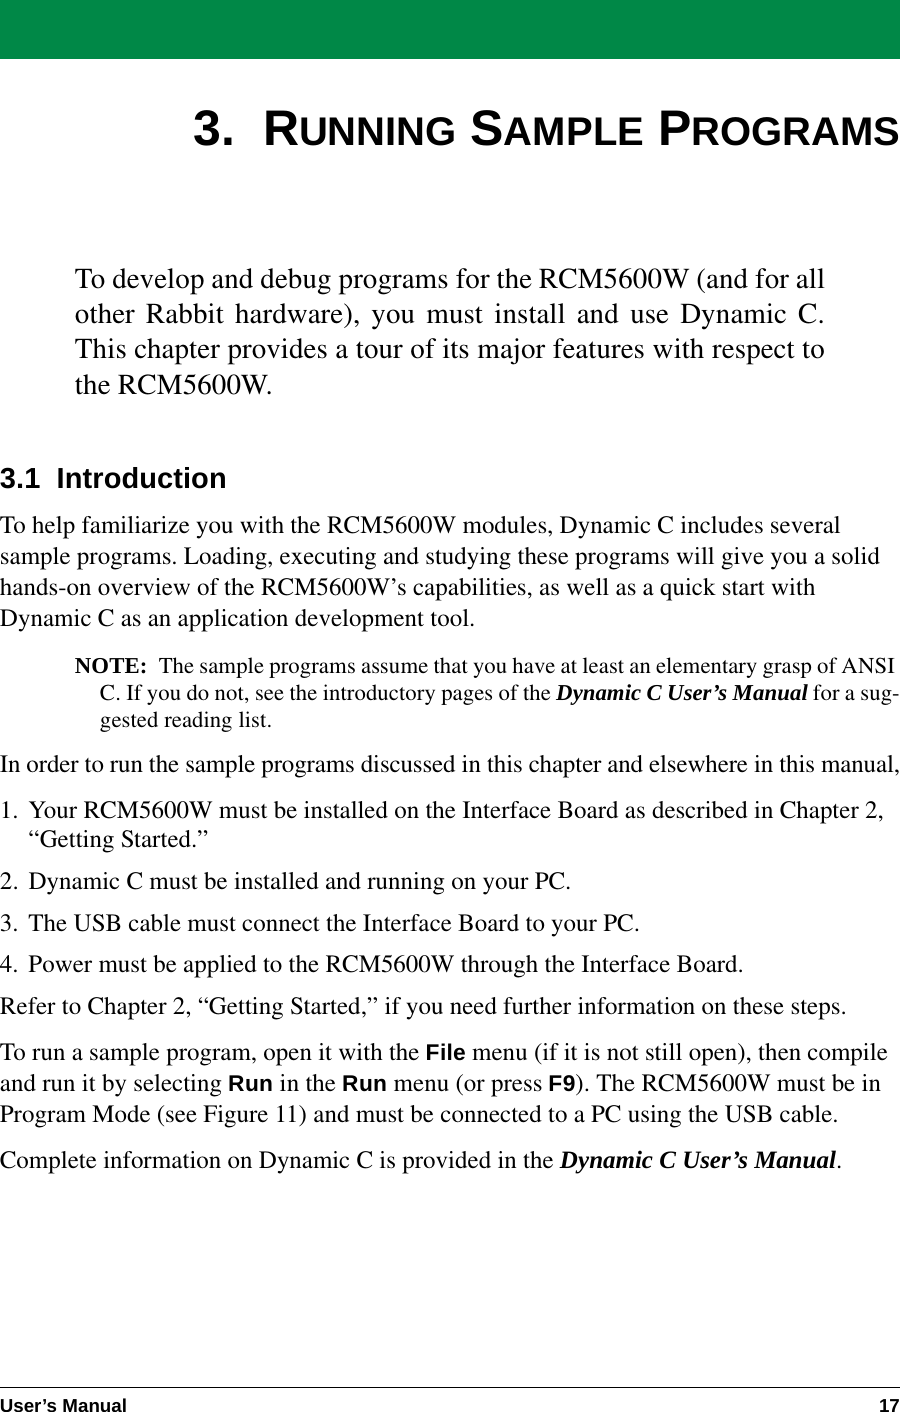 User’s Manual 173.  RUNNING SAMPLE PROGRAMSTo develop and debug programs for the RCM5600W (and for allother Rabbit hardware), you must install and use Dynamic C.This chapter provides a tour of its major features with respect tothe RCM5600W.3.1  IntroductionTo help familiarize you with the RCM5600W modules, Dynamic C includes several sample programs. Loading, executing and studying these programs will give you a solid hands-on overview of the RCM5600W’s capabilities, as well as a quick start with Dynamic C as an application development tool.NOTE: The sample programs assume that you have at least an elementary grasp of ANSI C. If you do not, see the introductory pages of the Dynamic C User’s Manual for a sug-gested reading list.In order to run the sample programs discussed in this chapter and elsewhere in this manual,1. Your RCM5600W must be installed on the Interface Board as described in Chapter 2, “Getting Started.”2. Dynamic C must be installed and running on your PC.3. The USB cable must connect the Interface Board to your PC.4. Power must be applied to the RCM5600W through the Interface Board.Refer to Chapter 2, “Getting Started,” if you need further information on these steps.To run a sample program, open it with the File menu (if it is not still open), then compile and run it by selecting Run in the Run menu (or press F9). The RCM5600W must be in Program Mode (see Figure 11) and must be connected to a PC using the USB cable.Complete information on Dynamic C is provided in the Dynamic C User’s Manual.